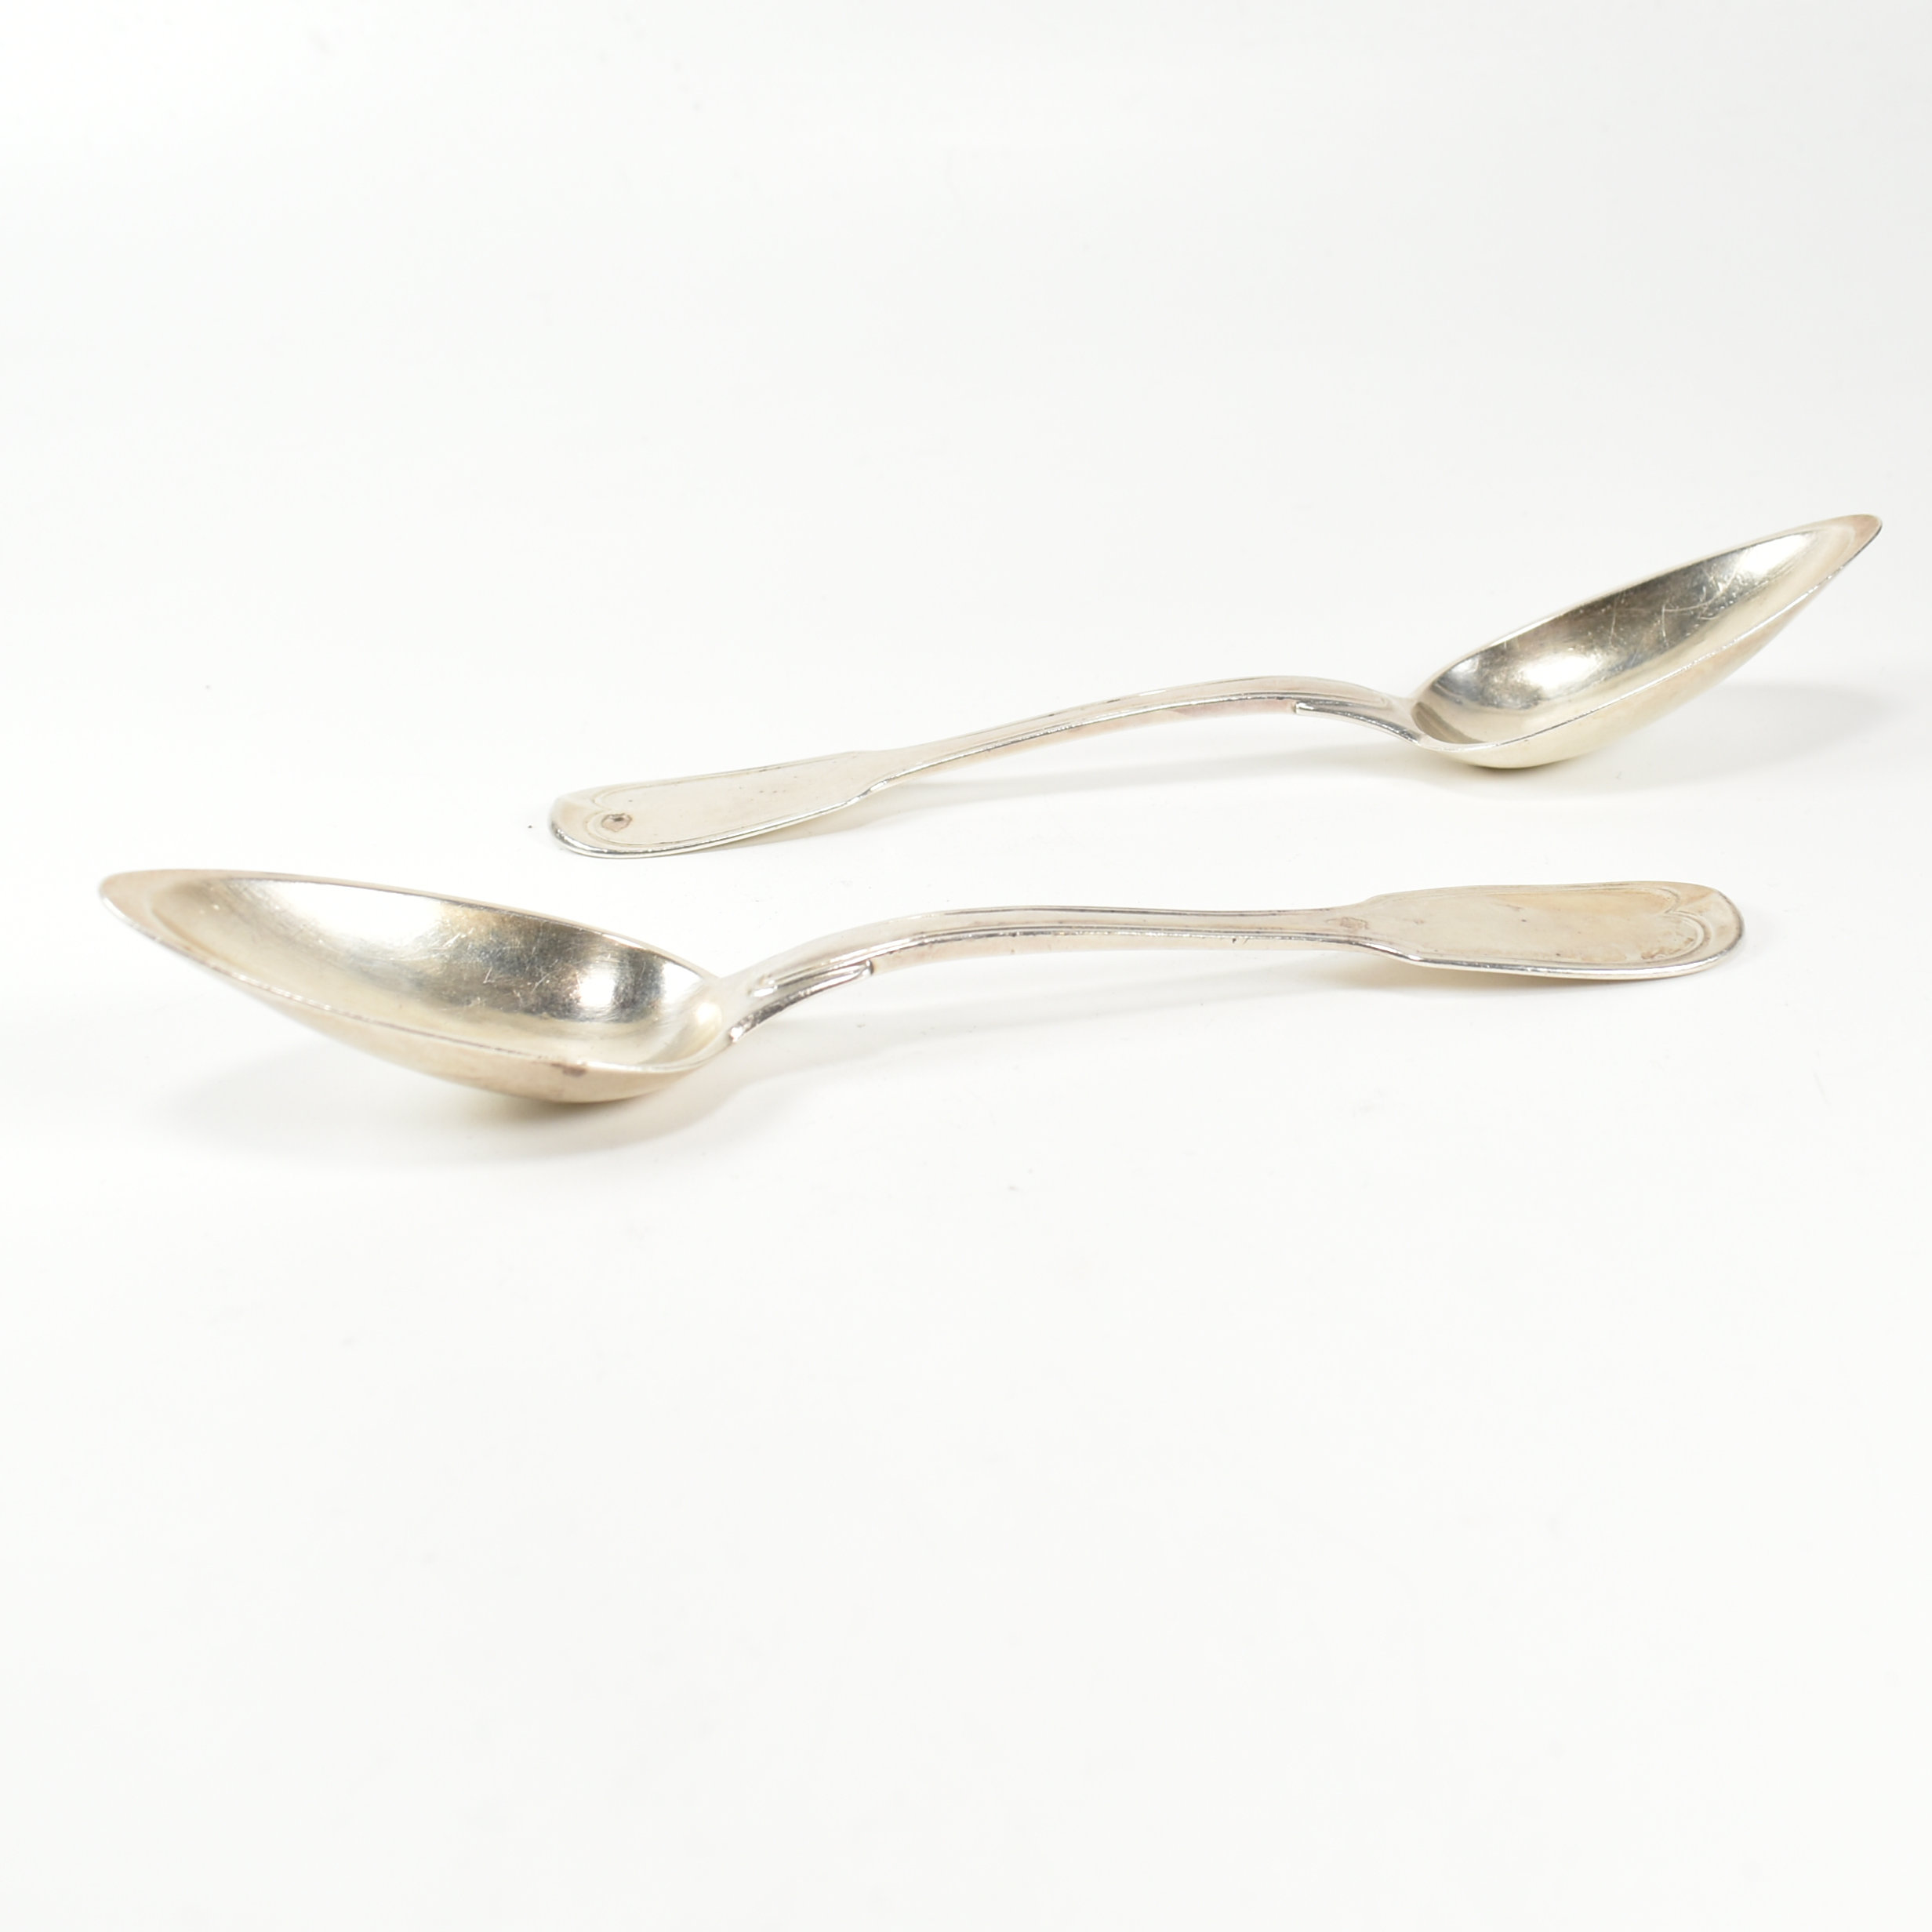 TWO EARLY 19TH CENTURY FRENCH SILVER SPOONS - Image 2 of 4